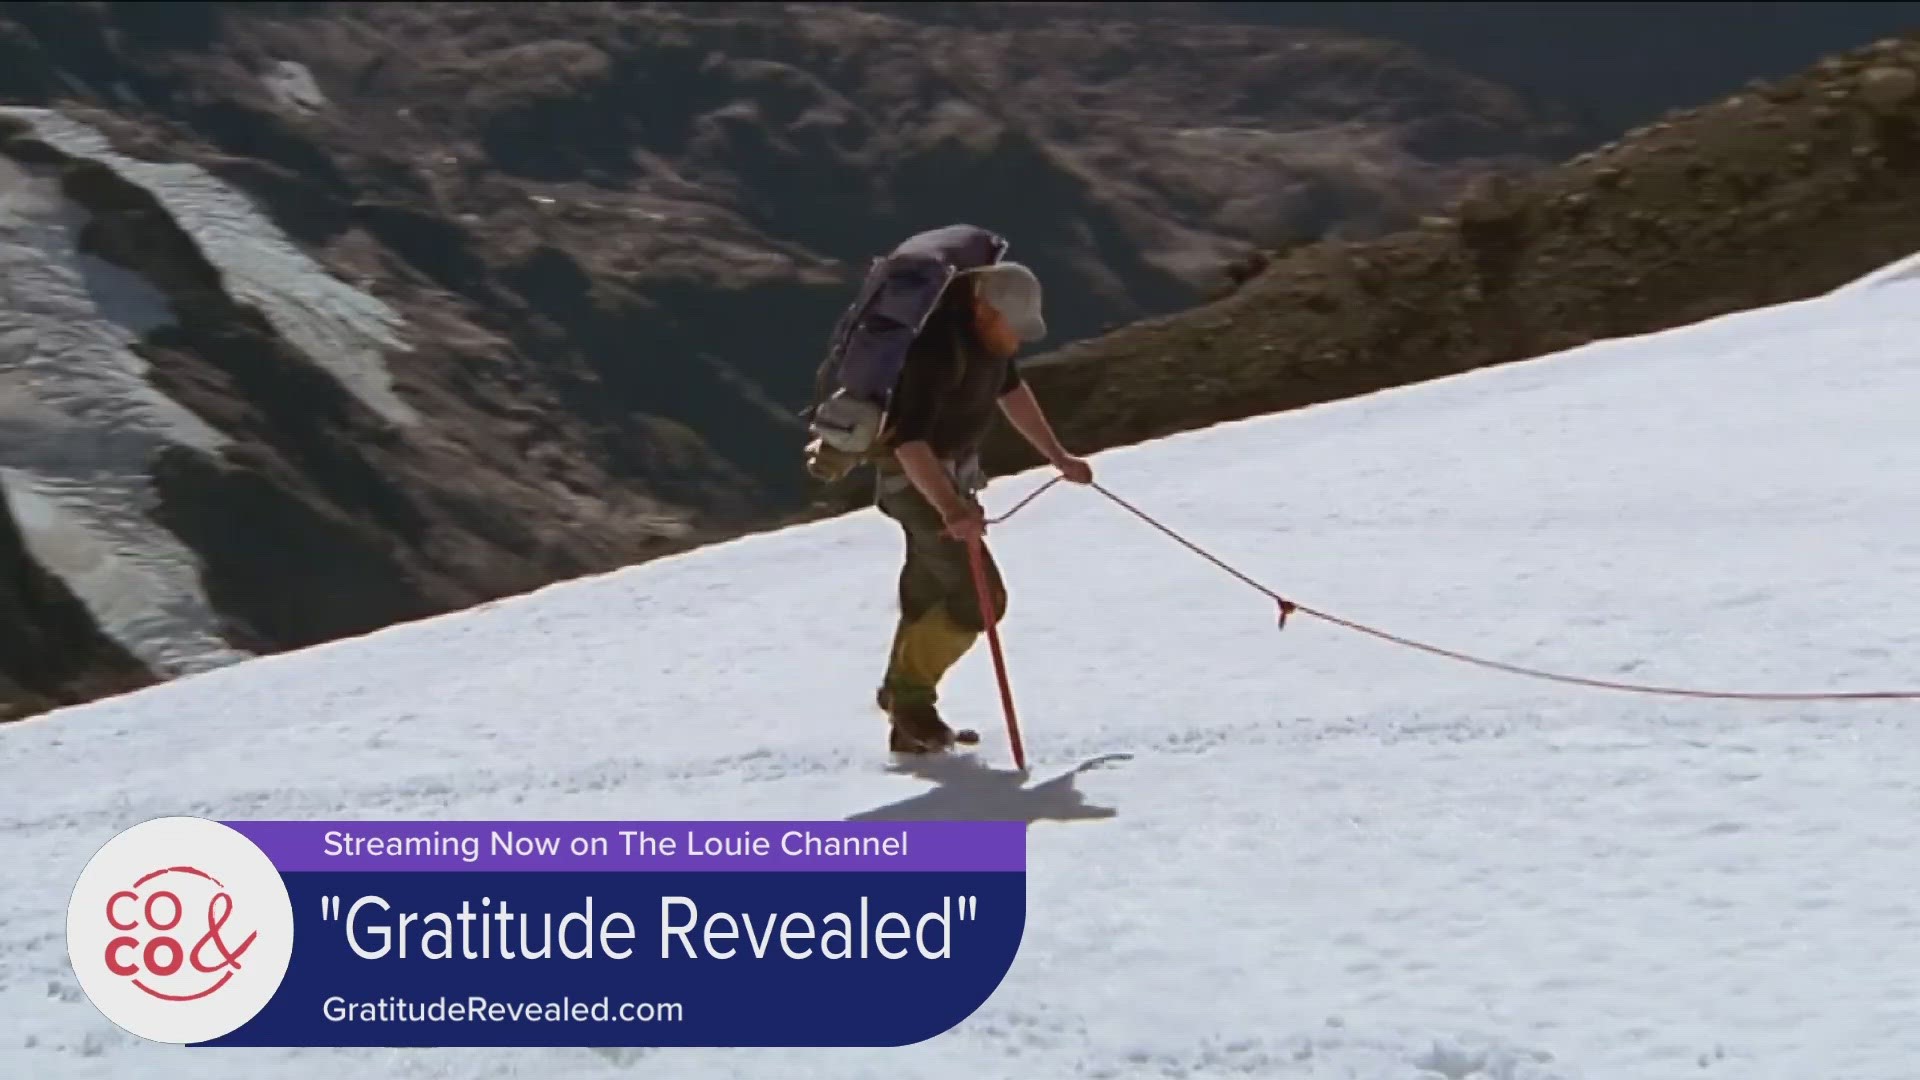 "Gratitude Revealed" is streaming now on the Louie Channel and on GratitudeRevealed.com.